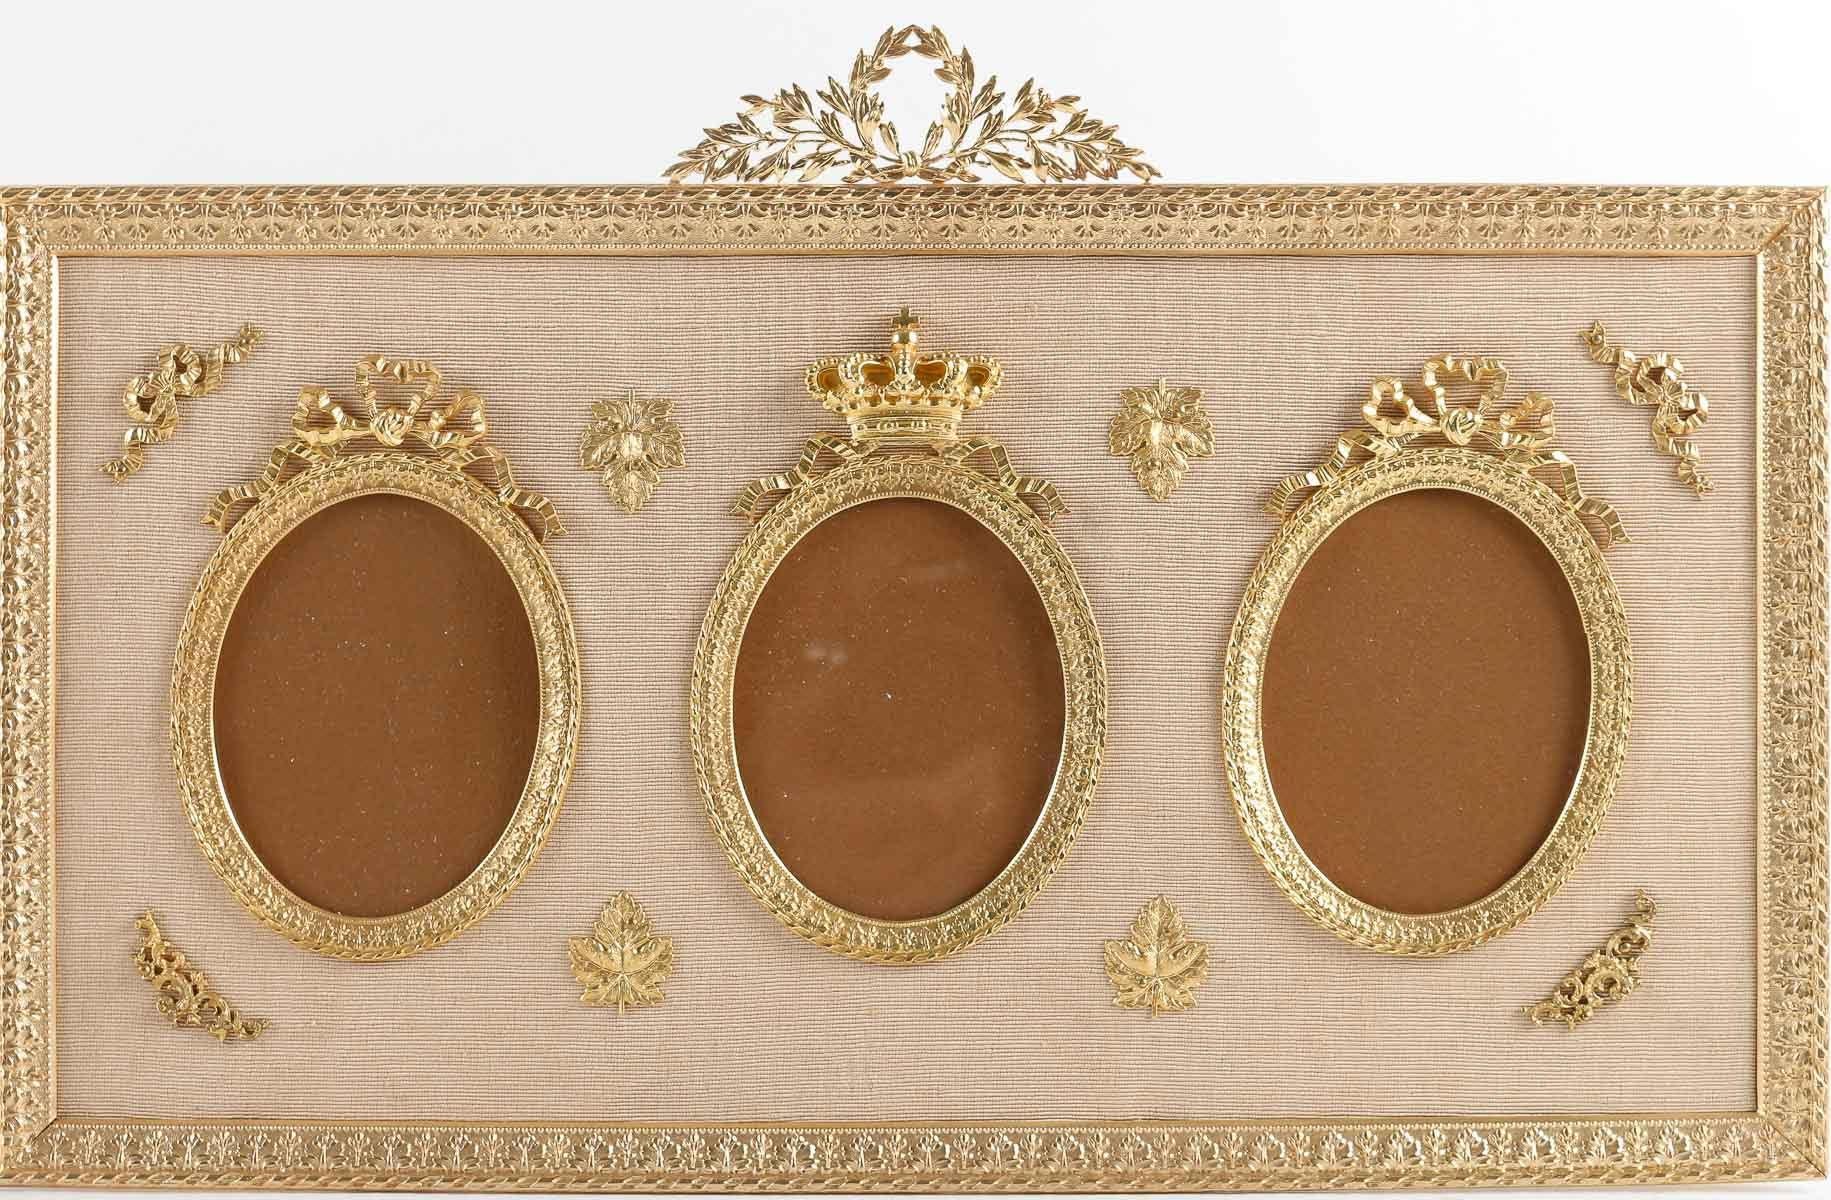 Pair of gilt bronze frames for 3 portraits, 19th Century.

Pair of frames with a crown on the central photo in gilt bronze and beige fabric, Napoleon III period, 19th century.
H: 24cm, W: 39cm, D: 2cm
Photo size: w: 3.5cm, h: 7cm